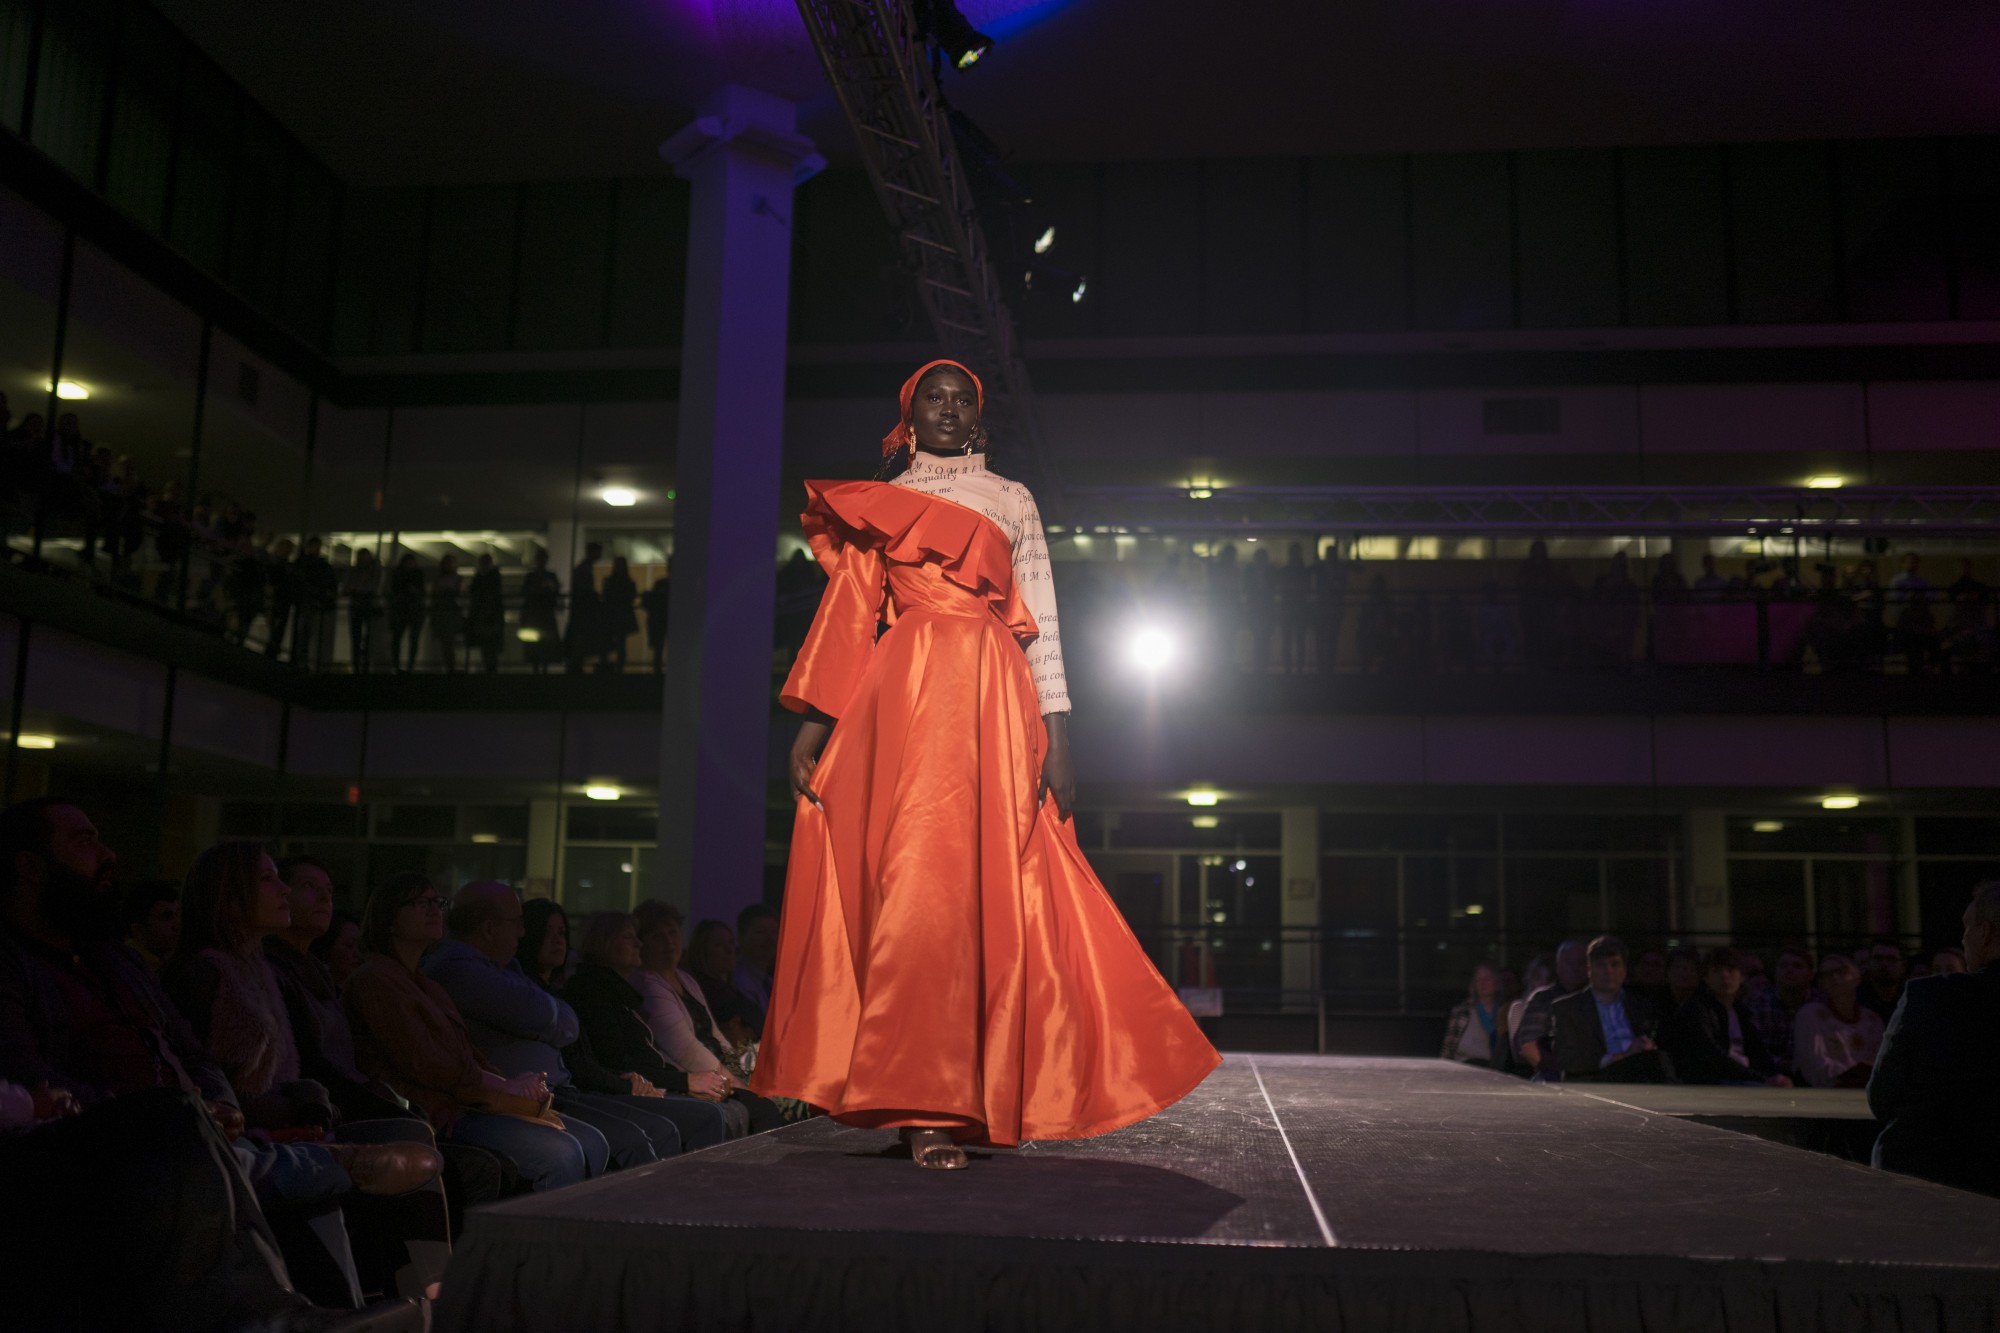 A model showing Designer Warda Moosas work walks the runway at the Amplified fashion show at Rapson Hall on Saturday, Feb 15. The show features designs by University of Minnesota apparel design seniors.